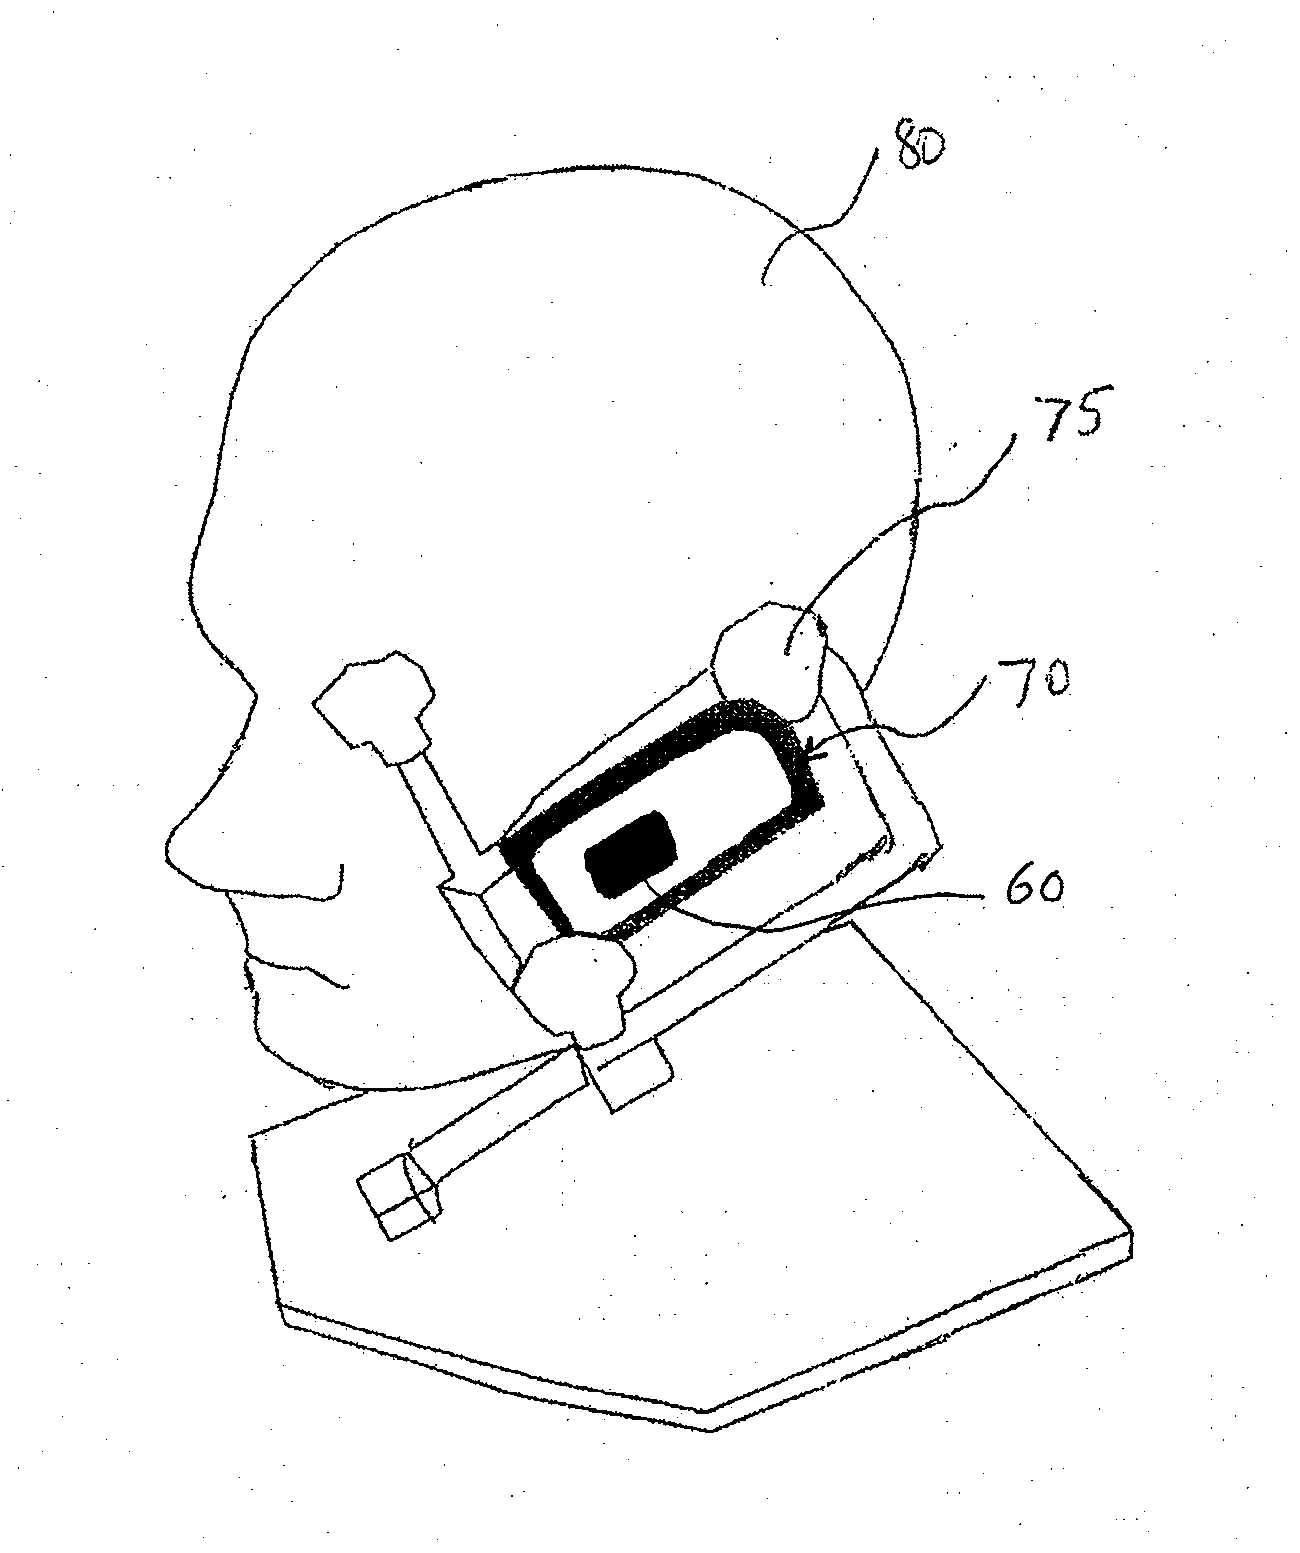 Attachment for an electronic communications device